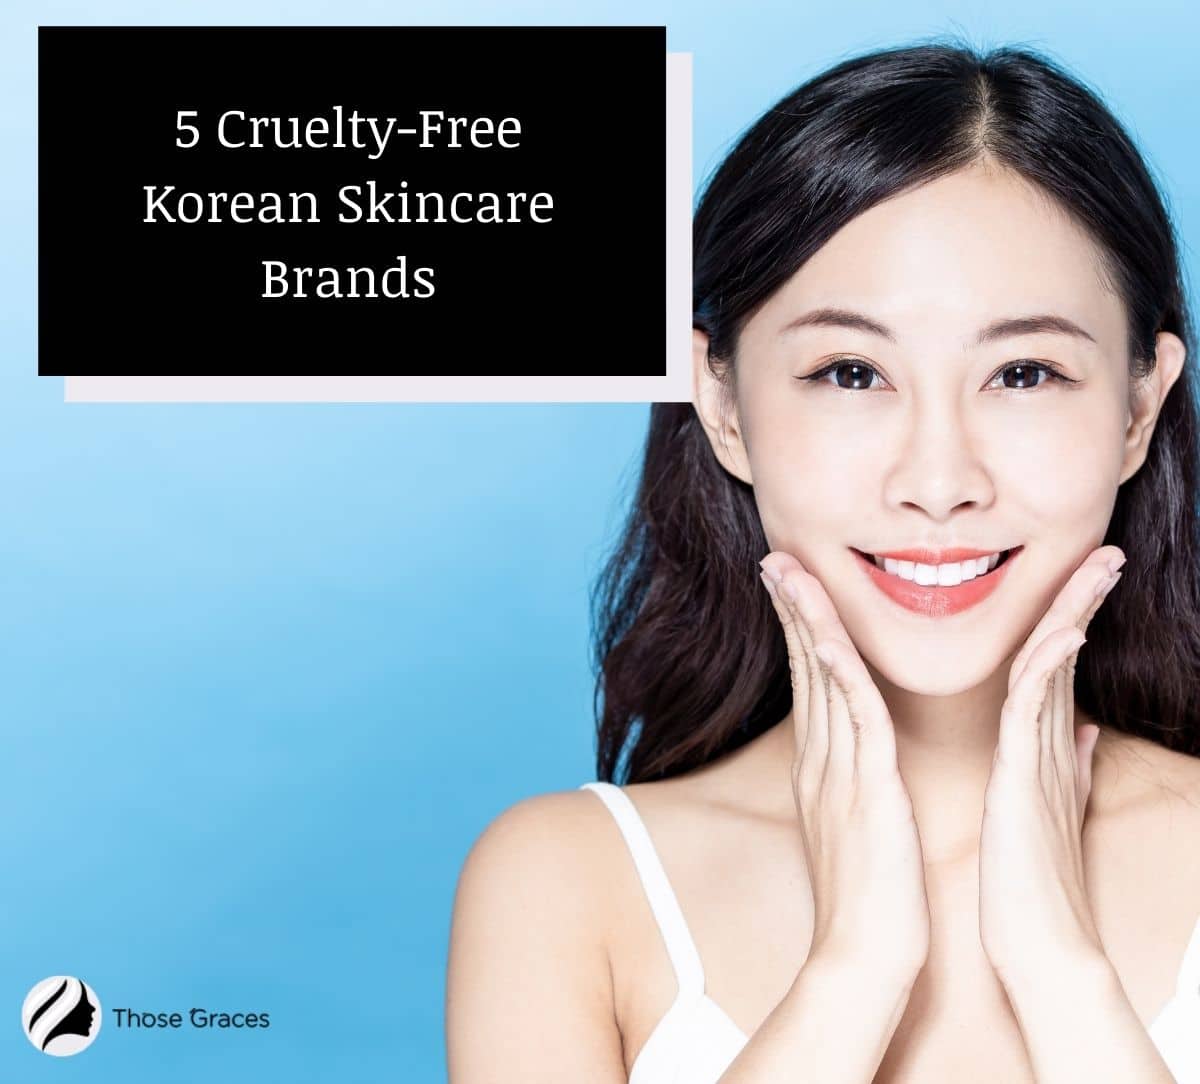 Korean lady showing her flawless skin achieved by using cruelty-free Korean skincare brands